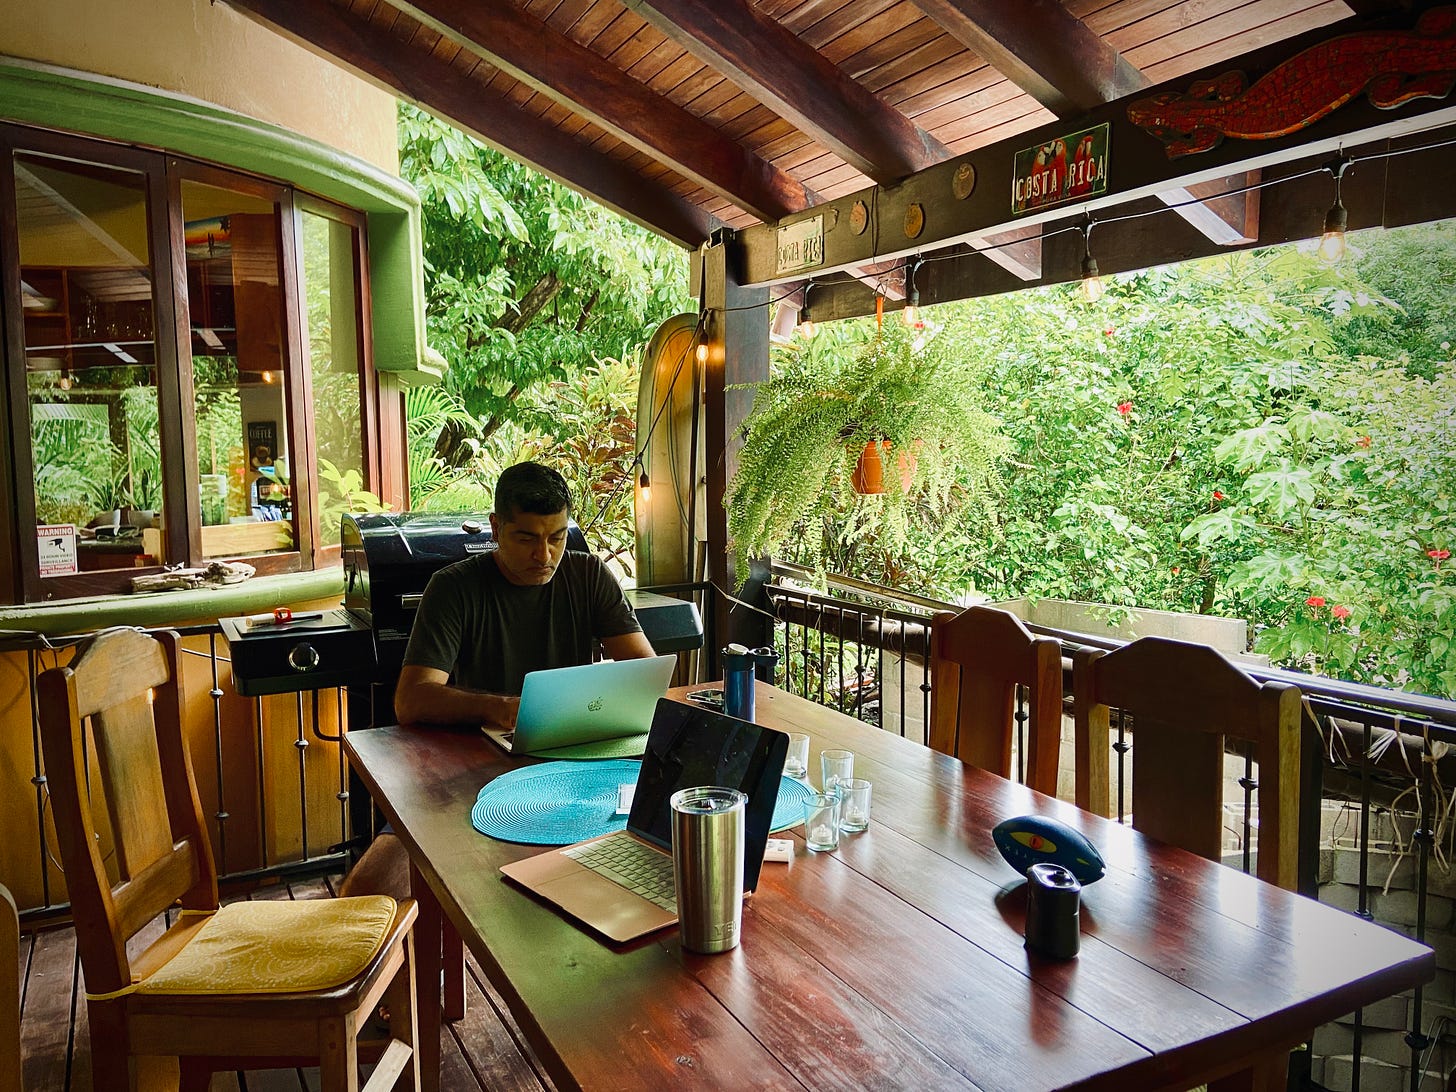 Man sitting at table on patio, at computer, overlooking plants outside.